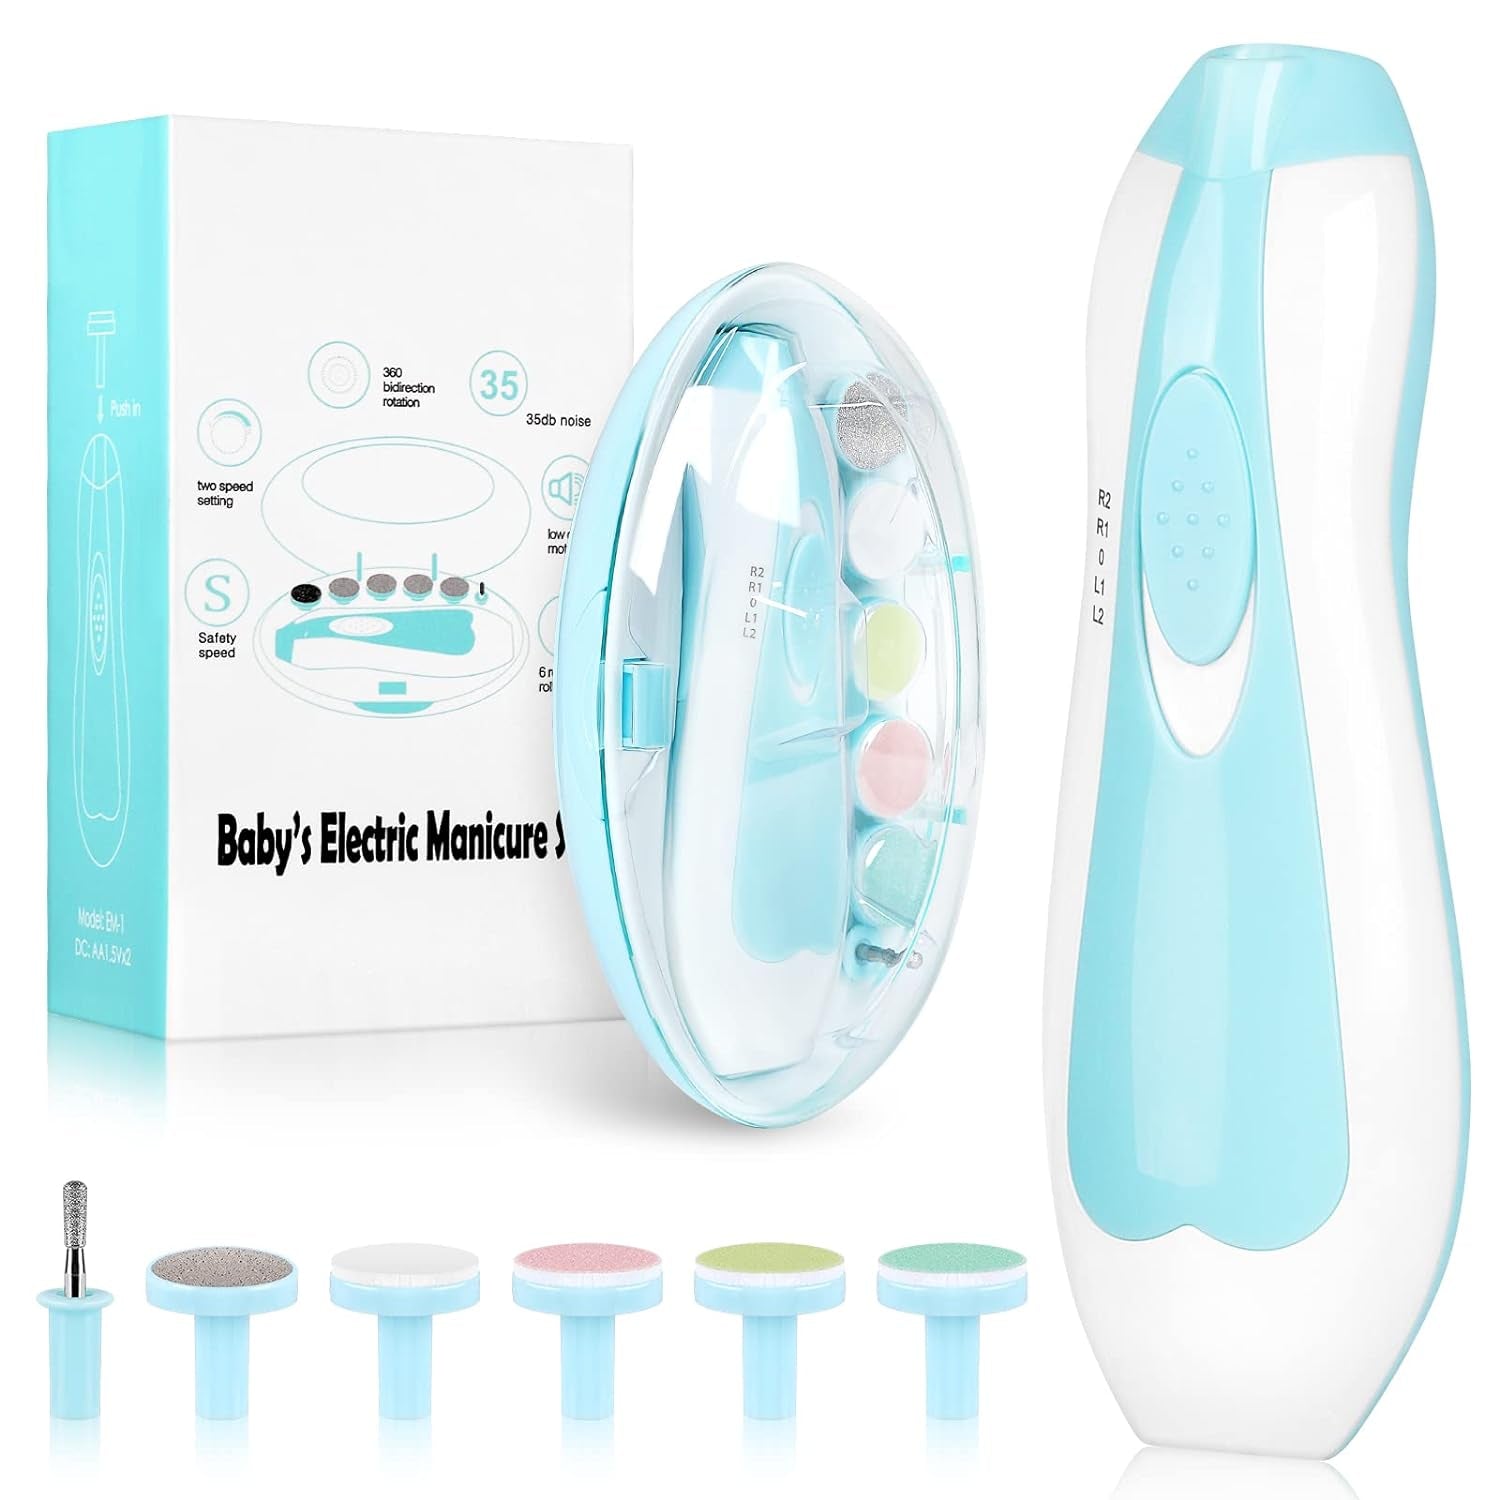 Baby Nail Trimmer Electric,Baby Nail Clippers, 6 in 1 Baby Nail File,Nail File Baby Grooming Kit Manicure Set for Toddler or Adults